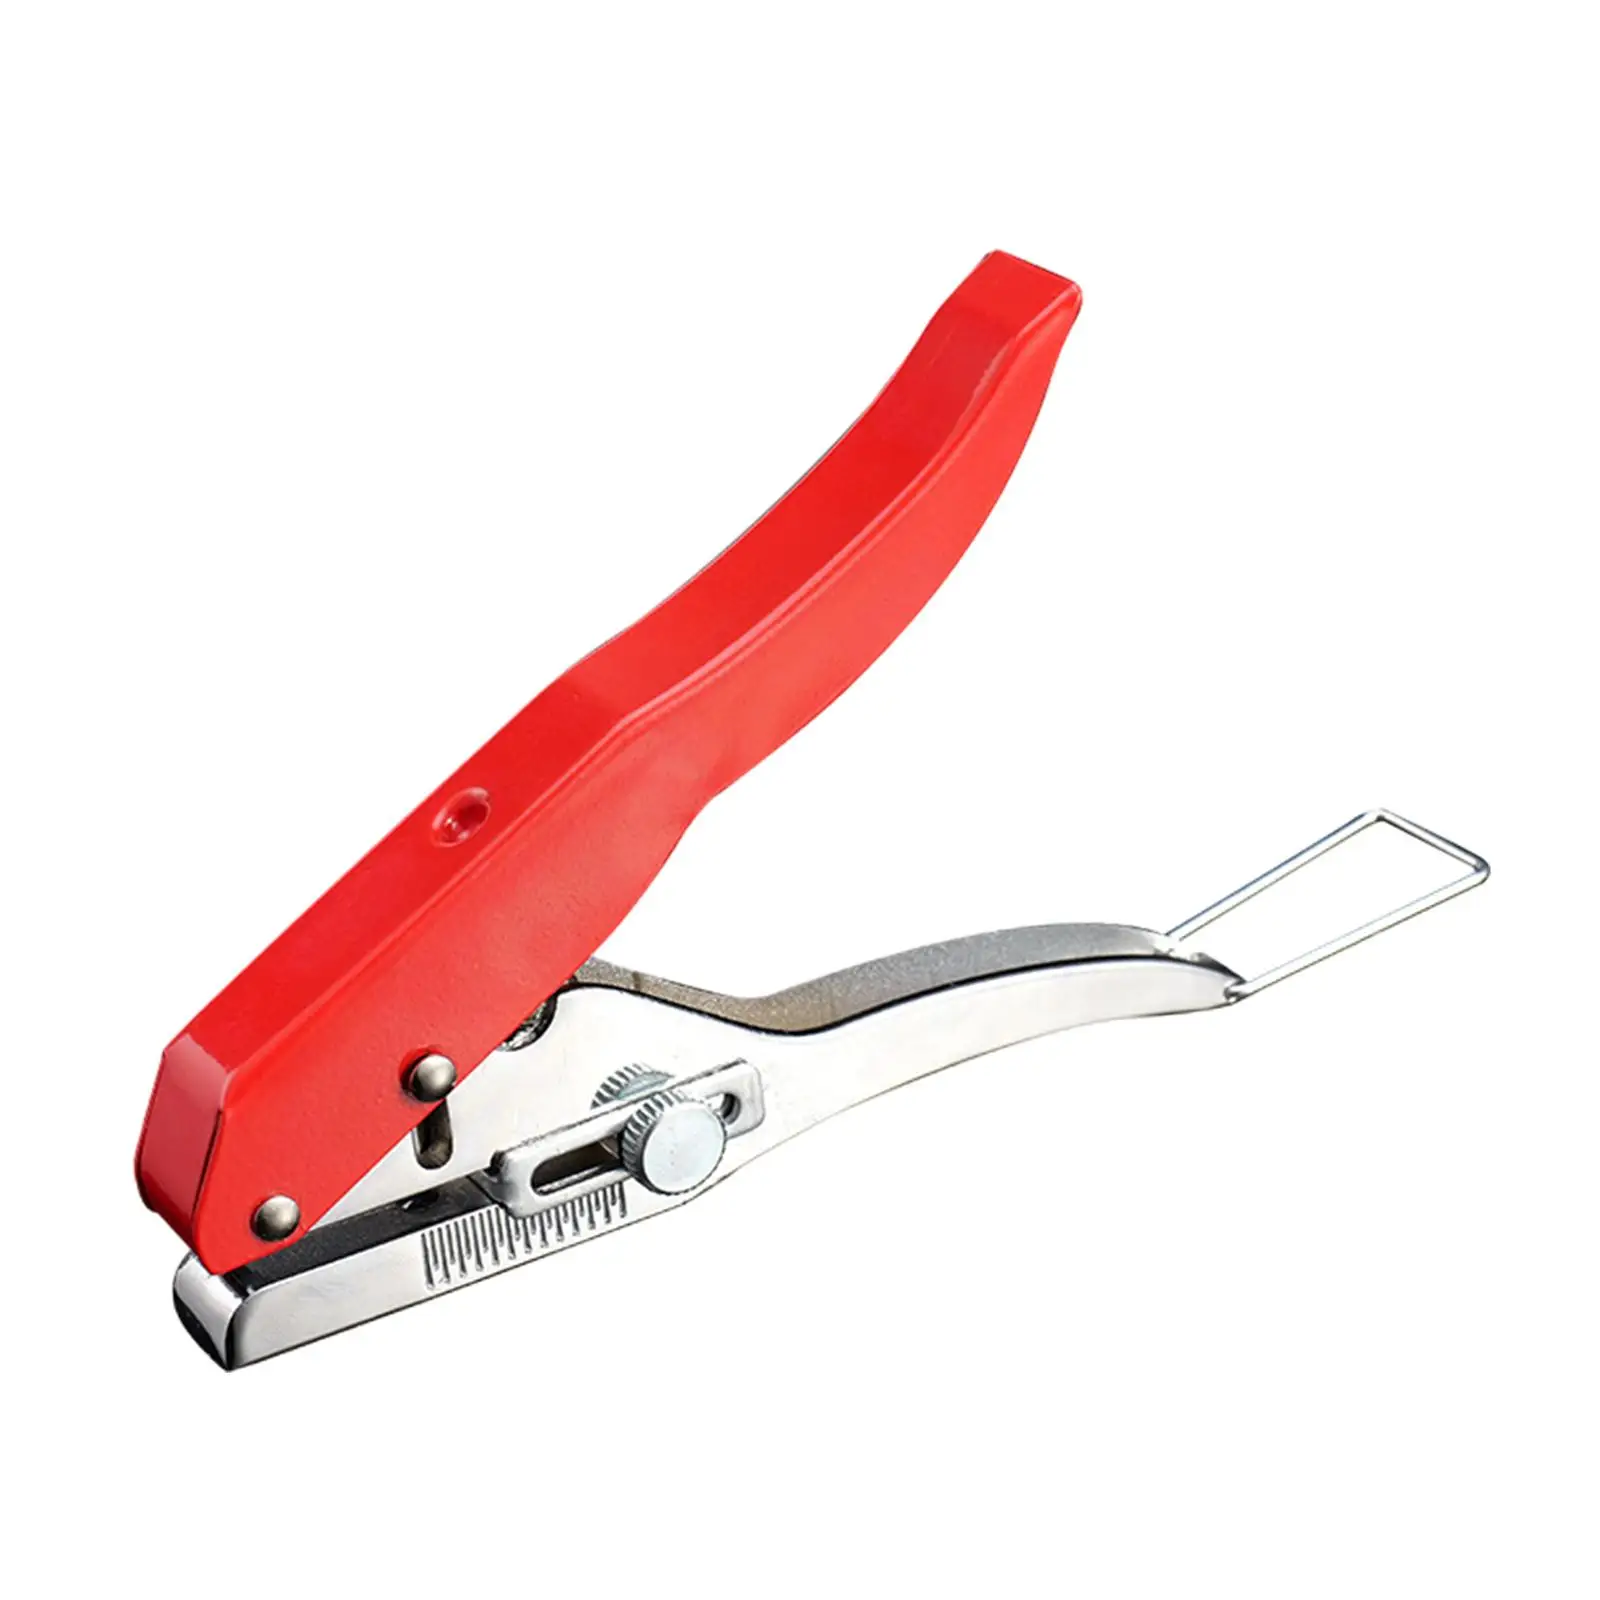 Single Hole Punch Handheld Round Puncher Pliers Portable 8mm Hole Punching Pliers for Photo PVC Card Craft Paper Label DIY Craft